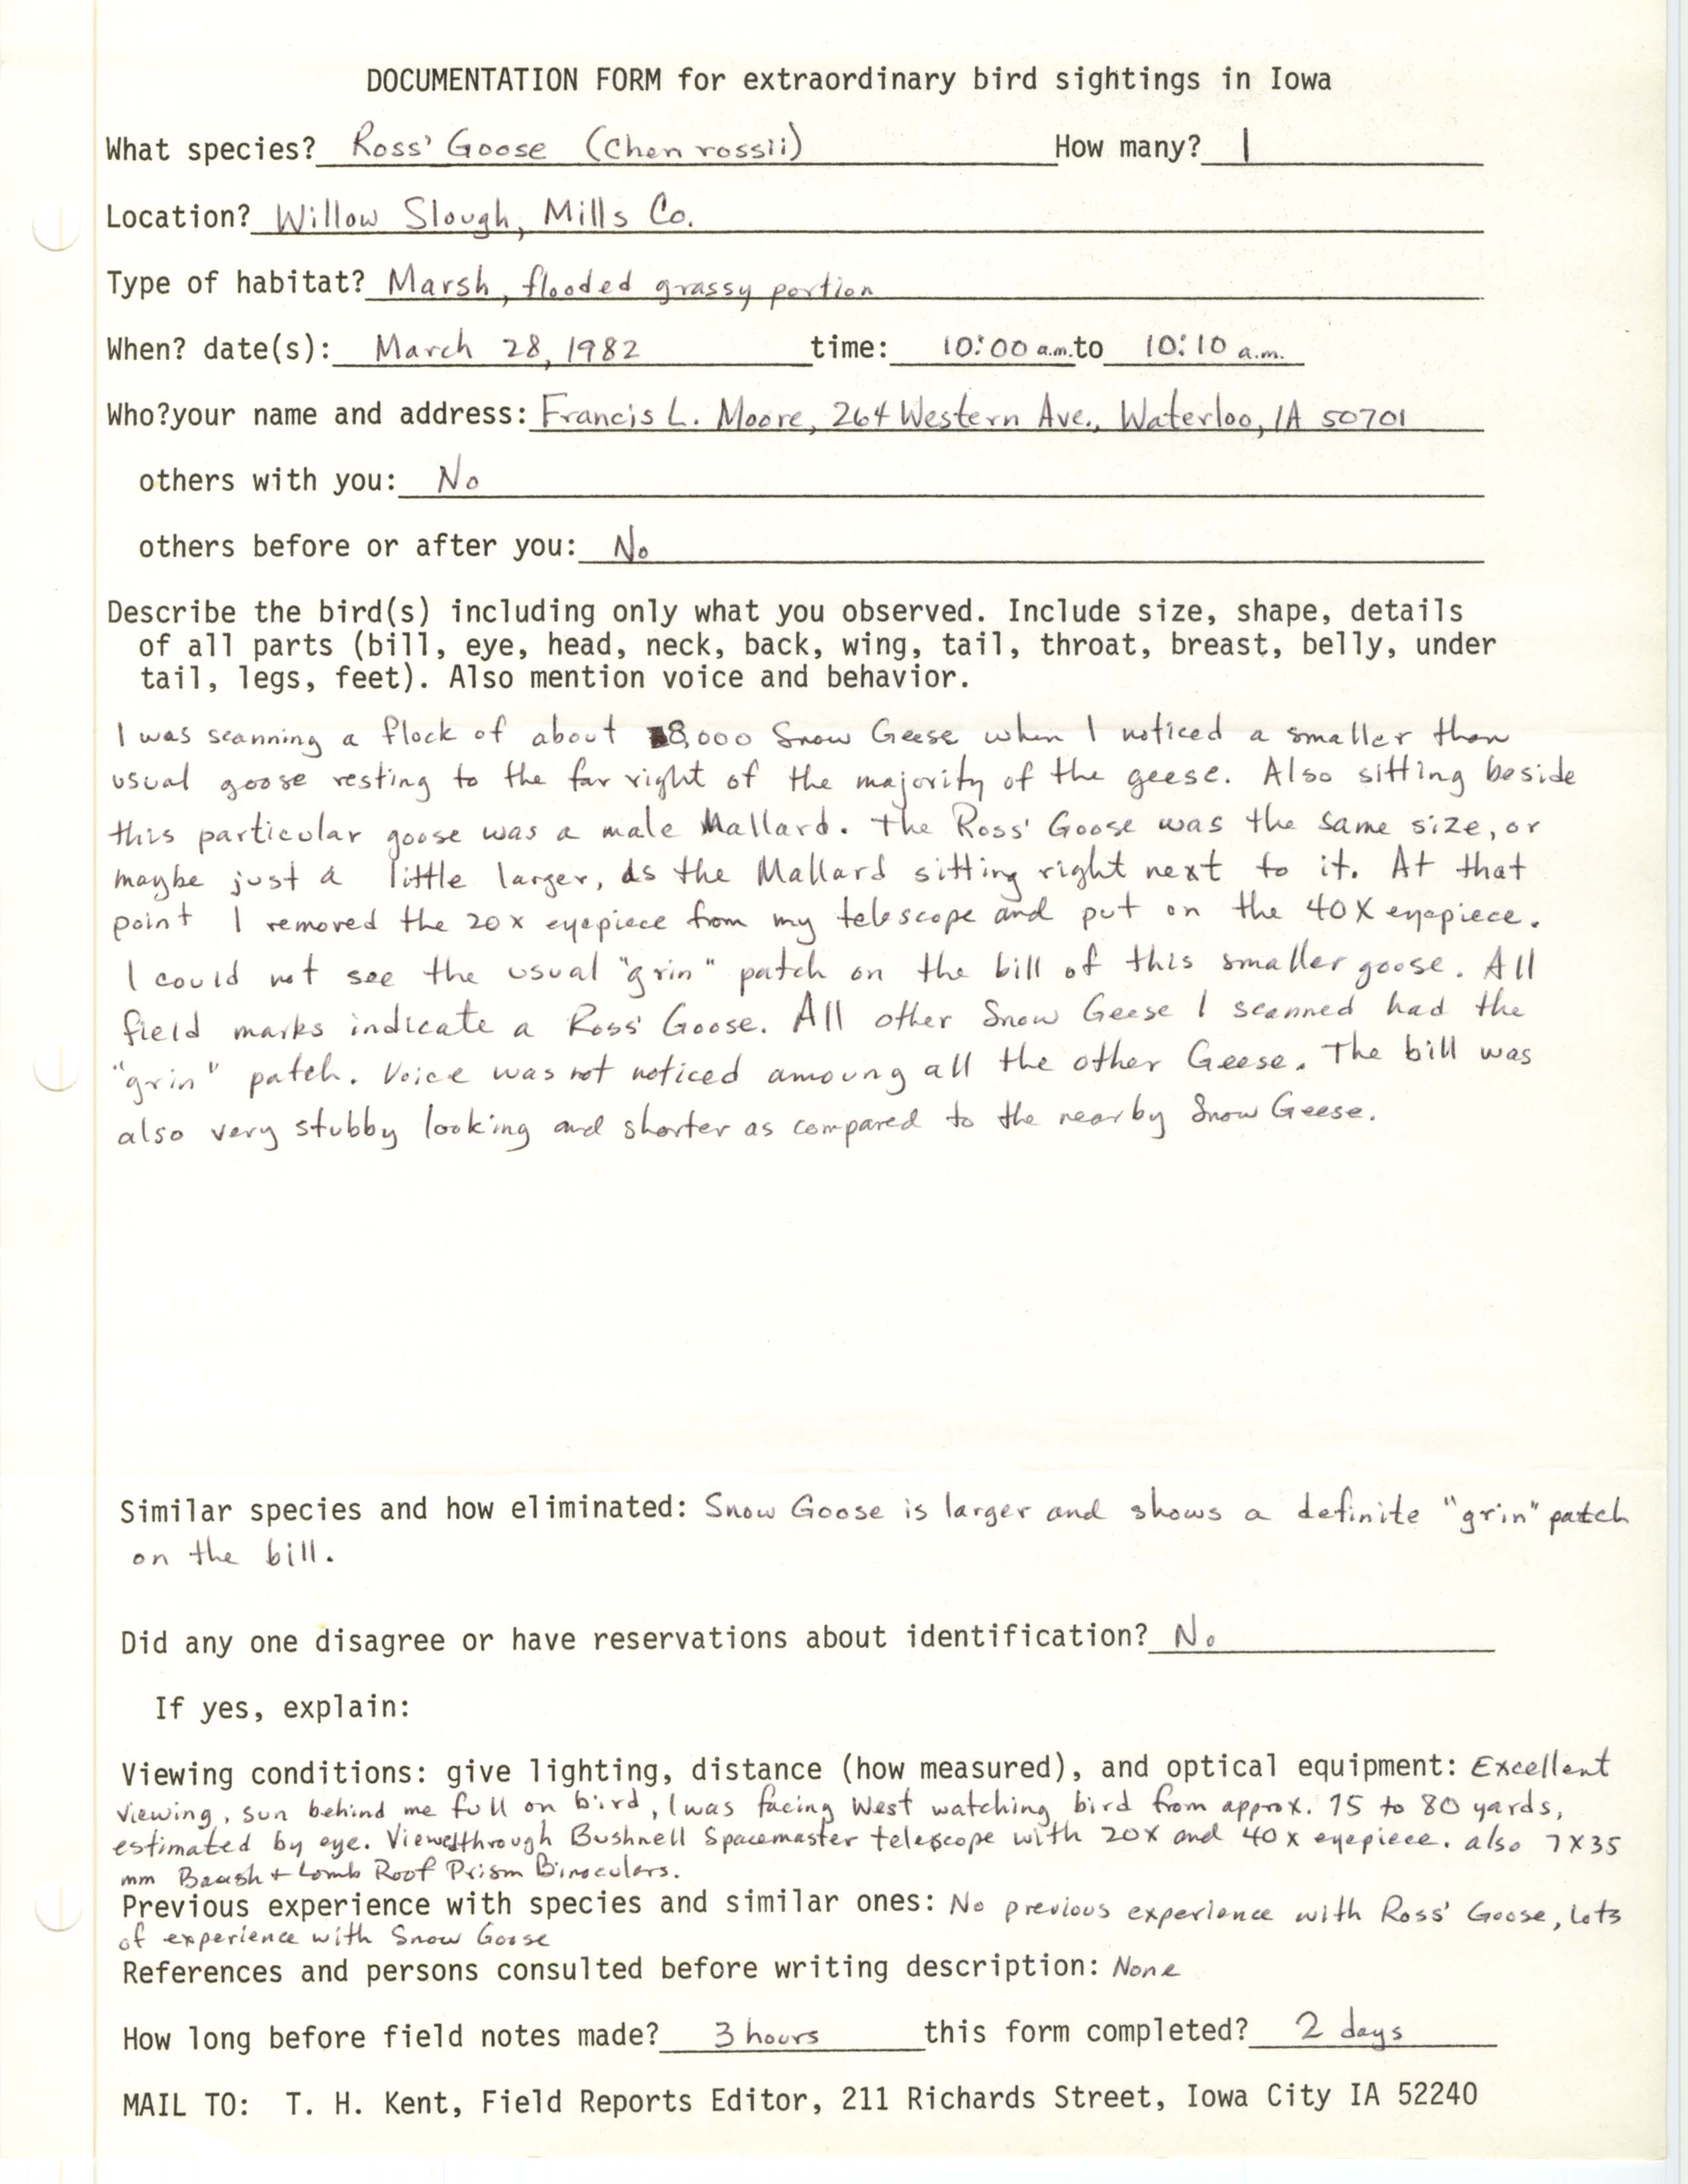 Rare bird documentation form for Ross' Goose at Willow Slough, 1982